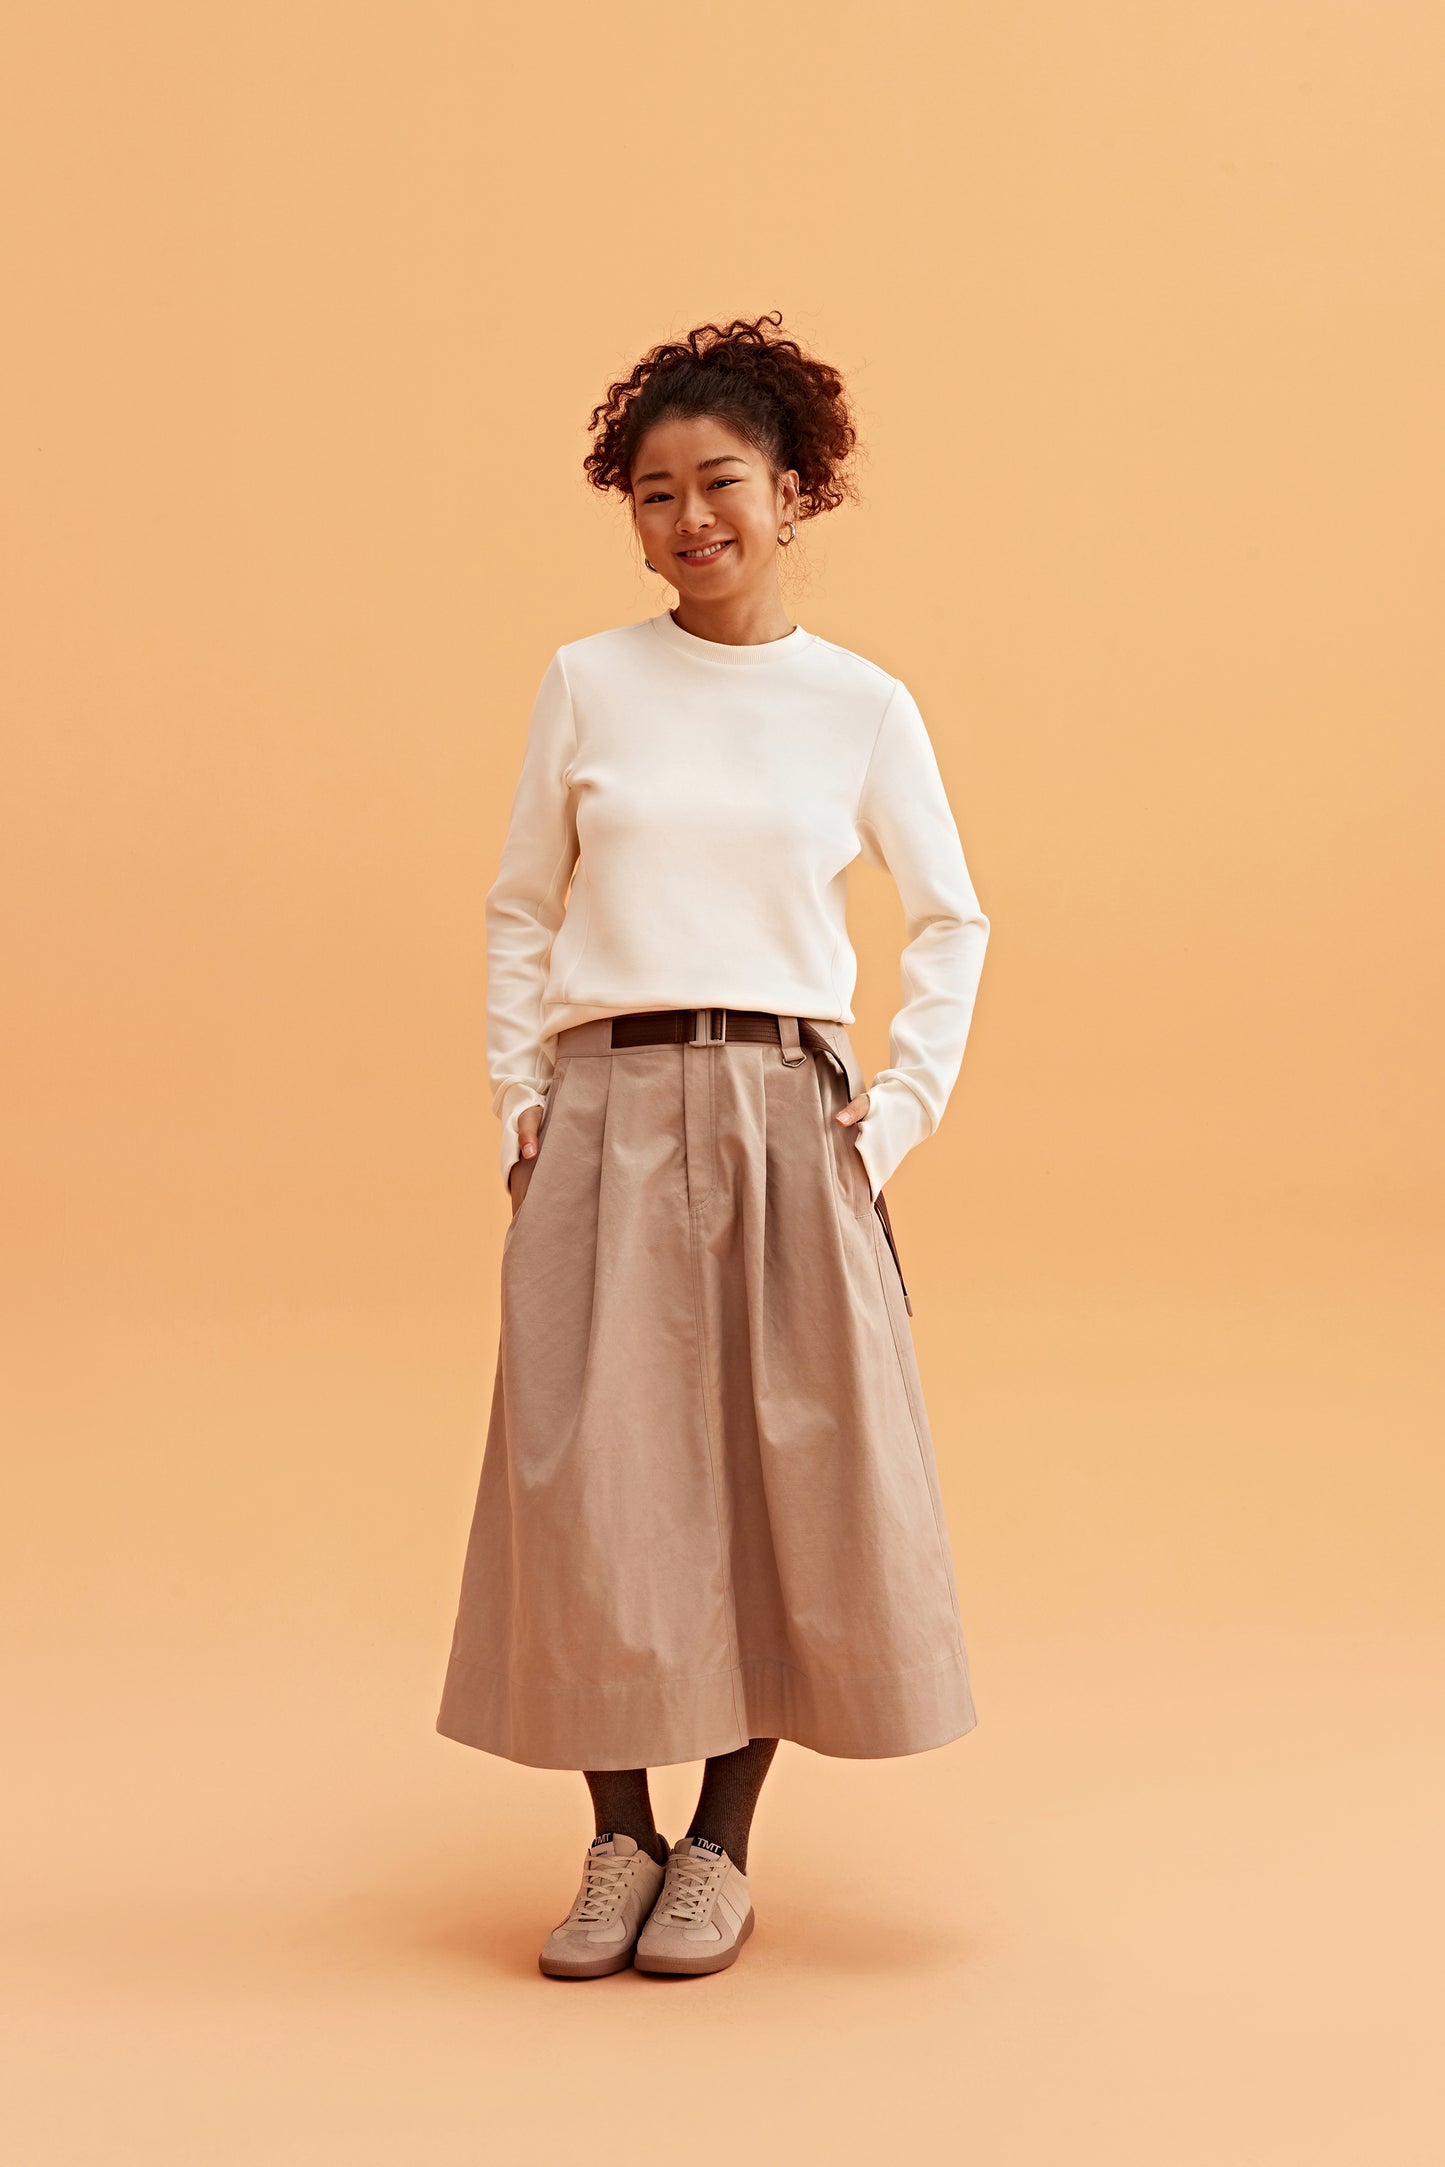 woman wearing a white sweatshirt and brown skirts.